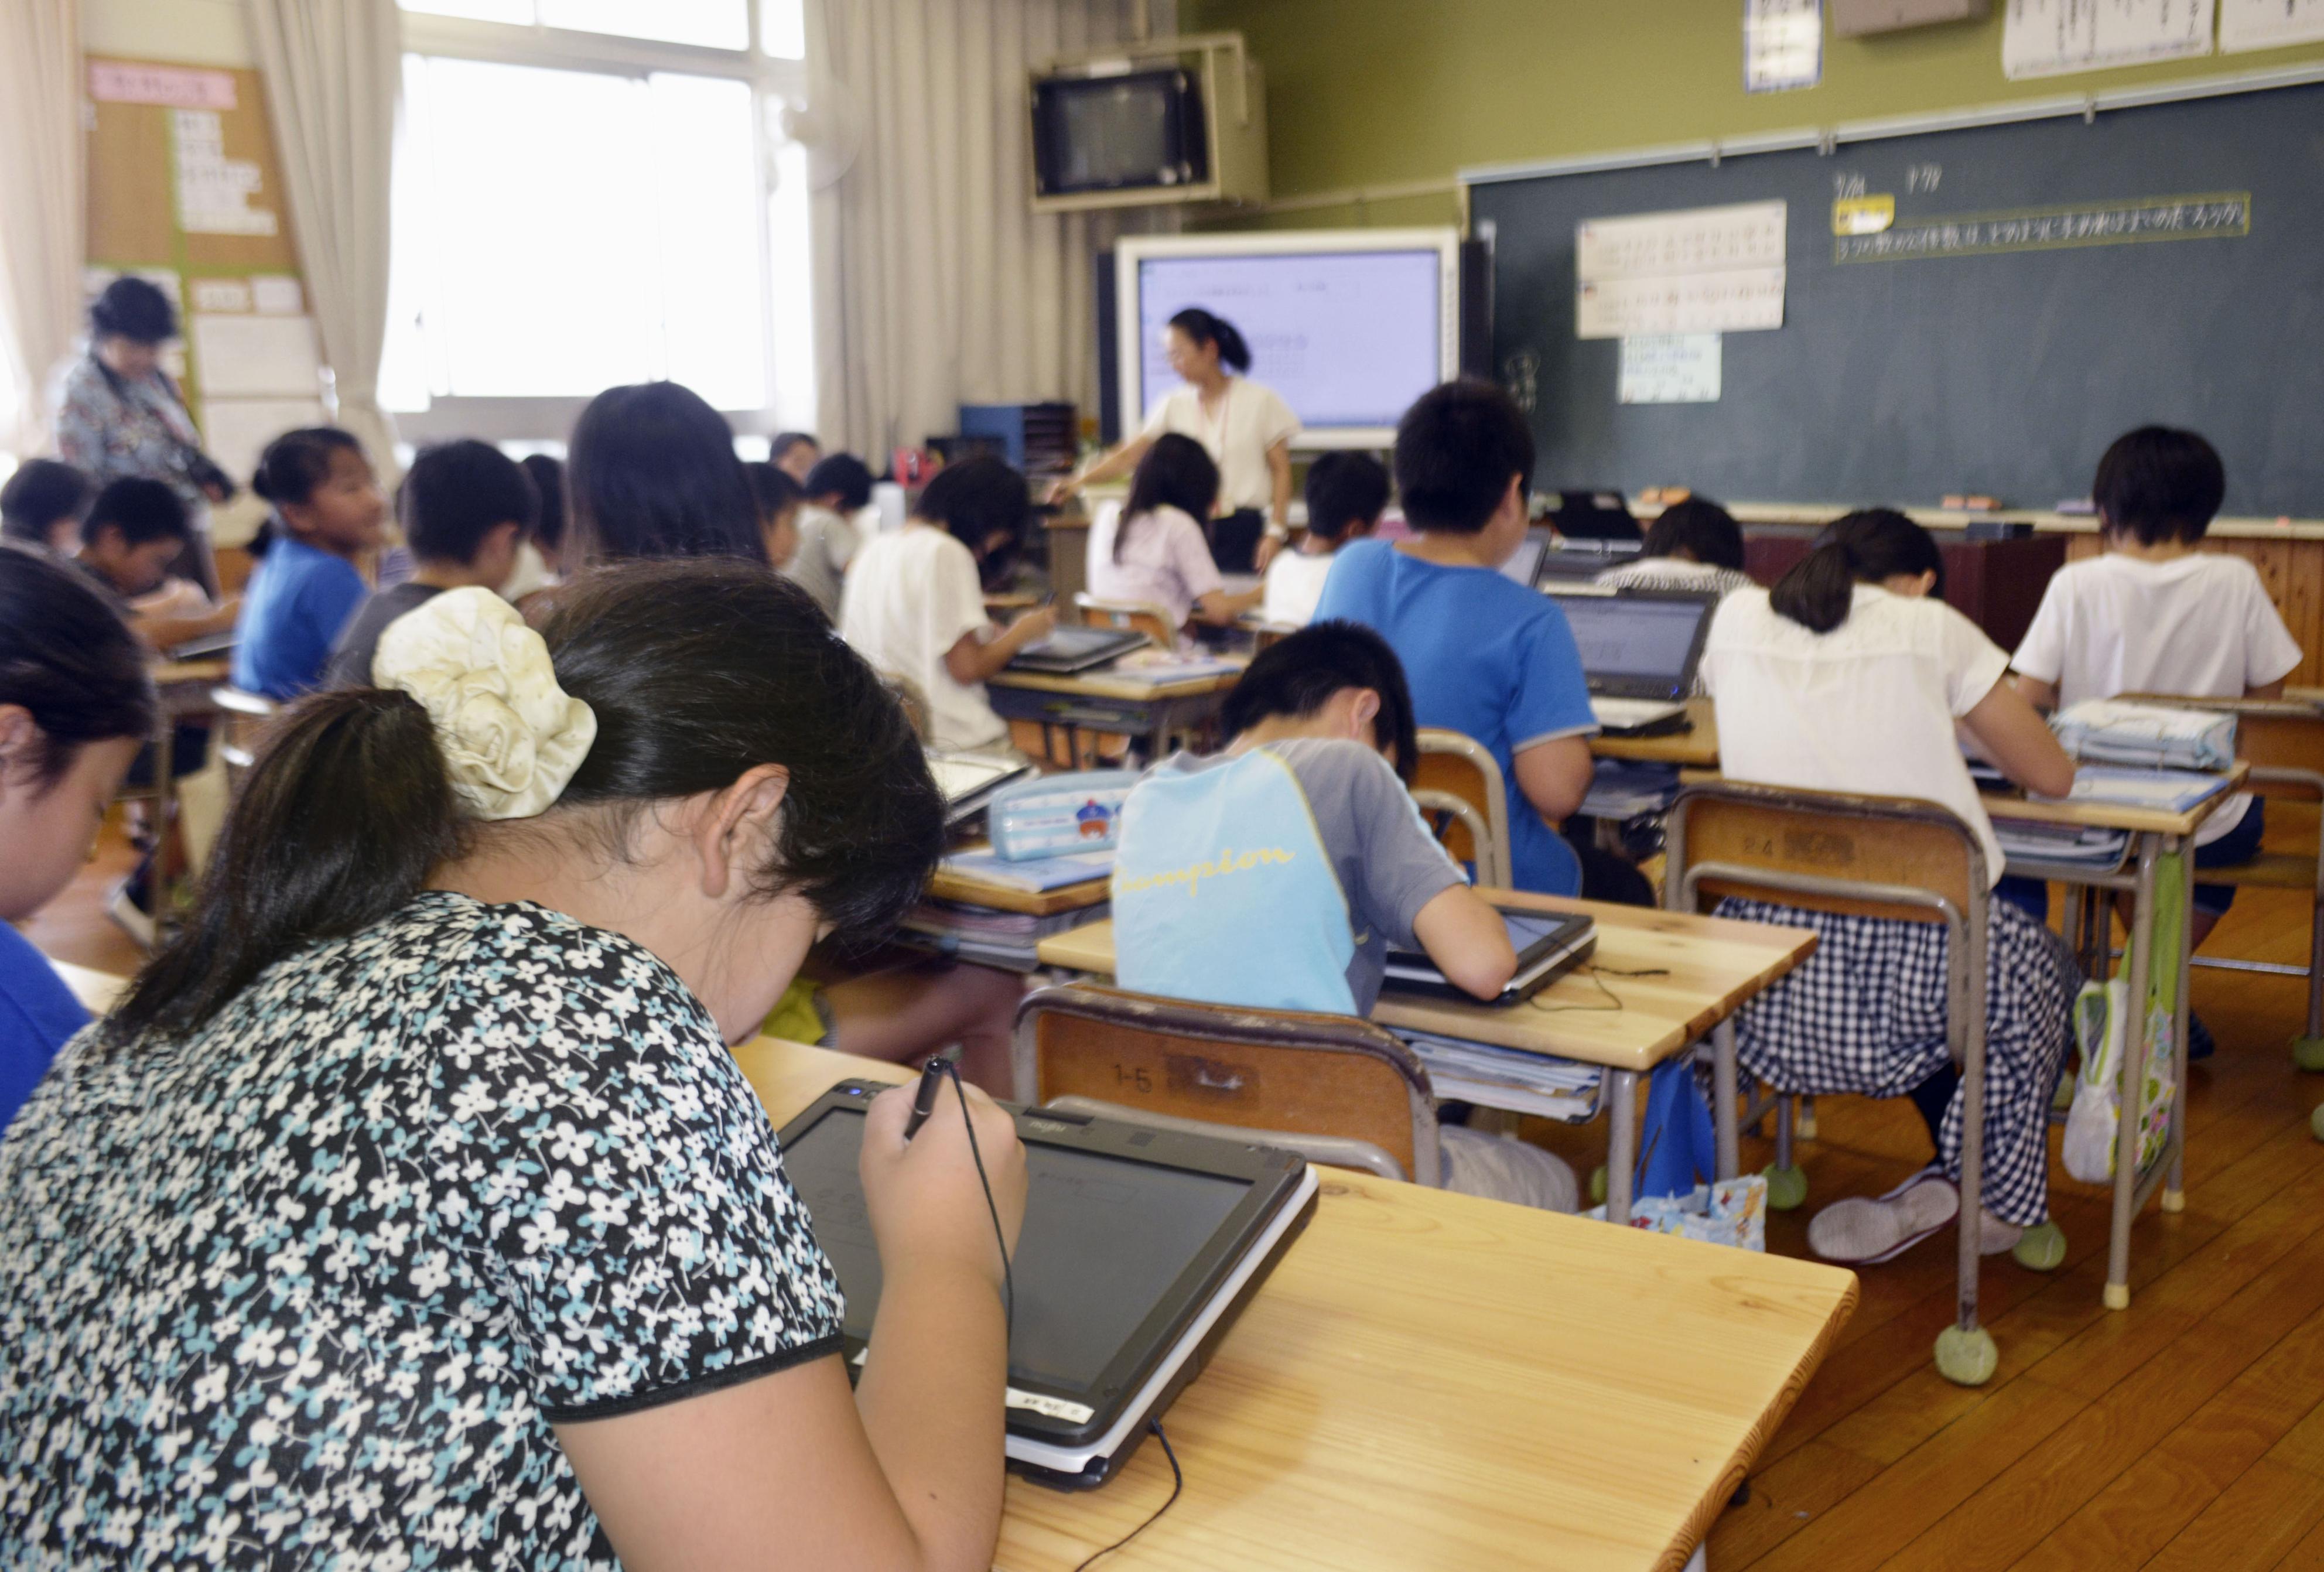 students using tablets